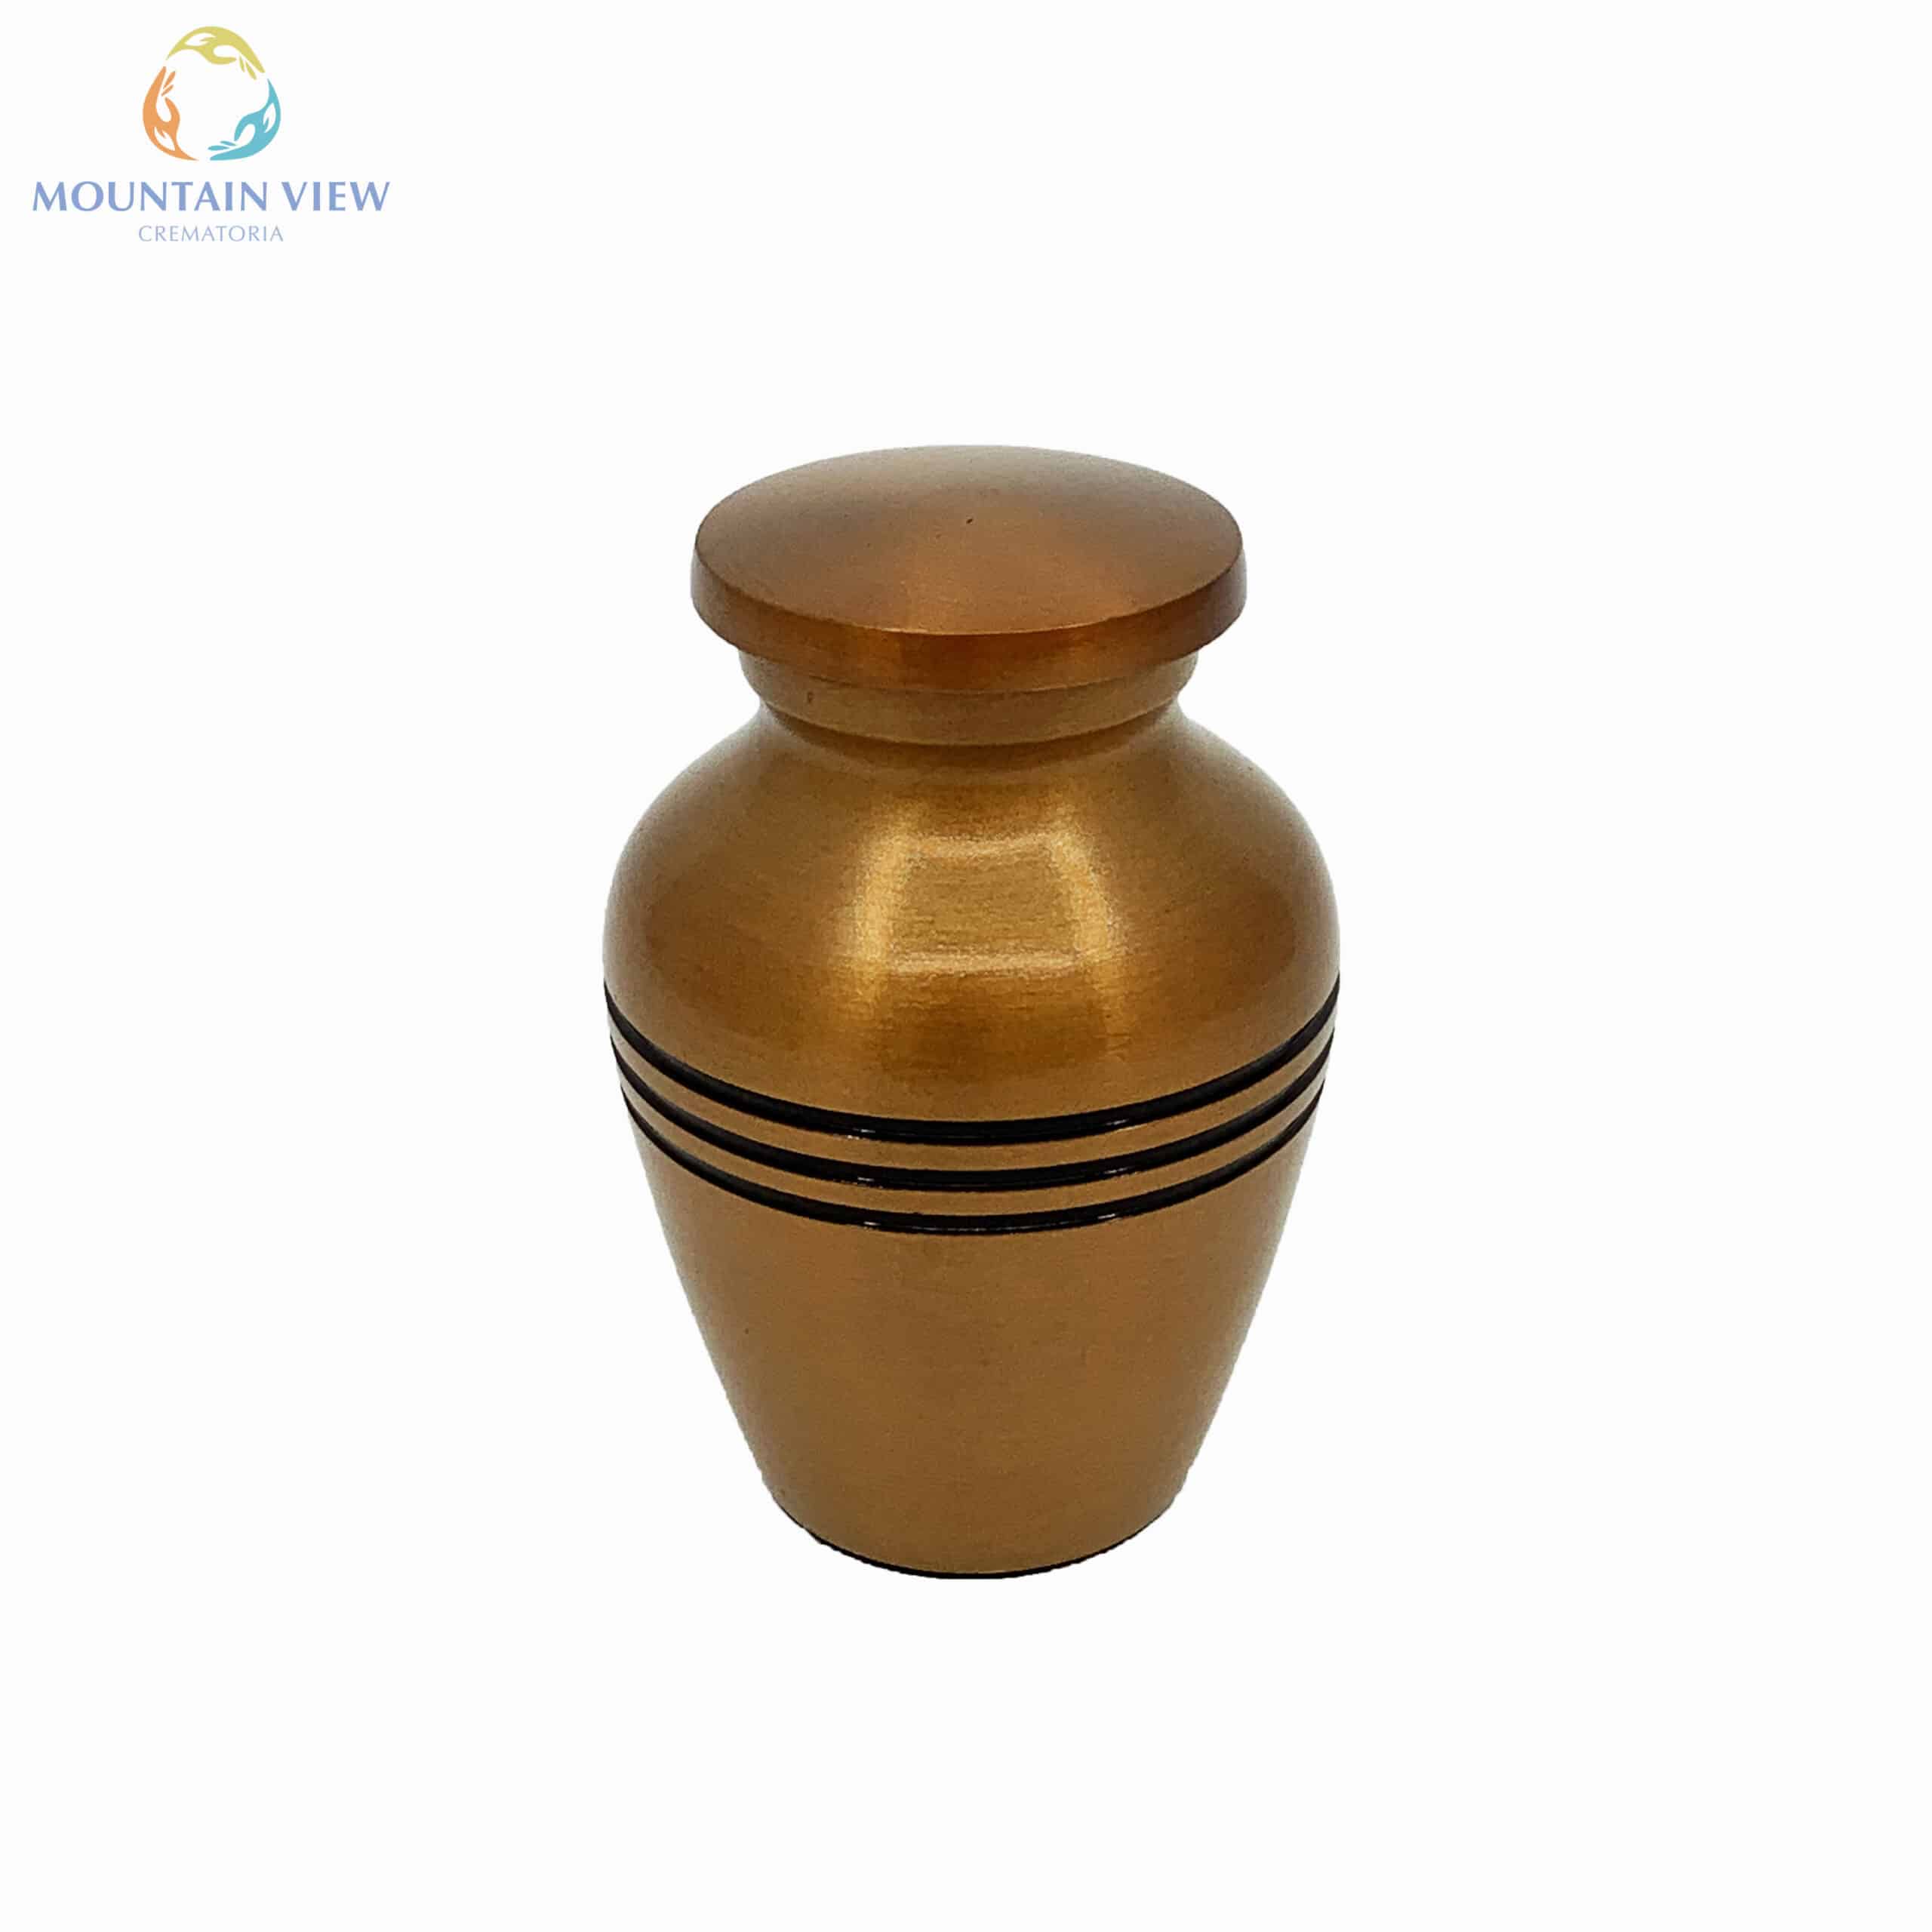 Classic Gold Brass Cremation Urn for Ashes